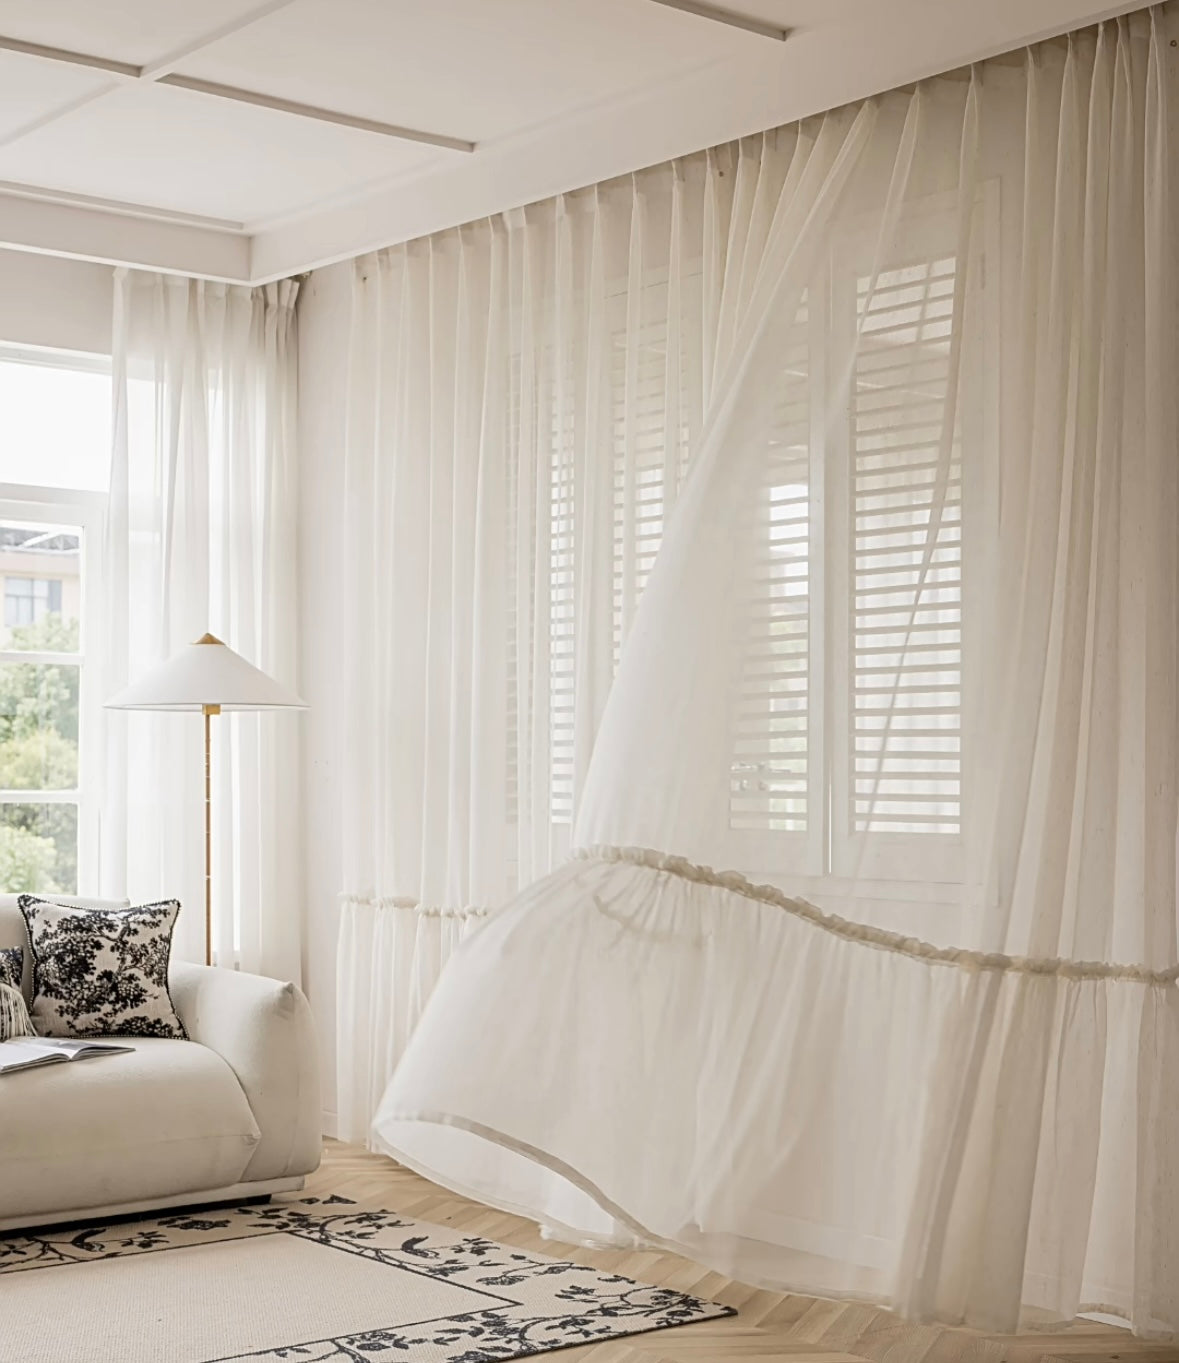 Elegant sheer curtains with ruffled hem in princess room setting, enhancing a luxurious and serene ambiance.